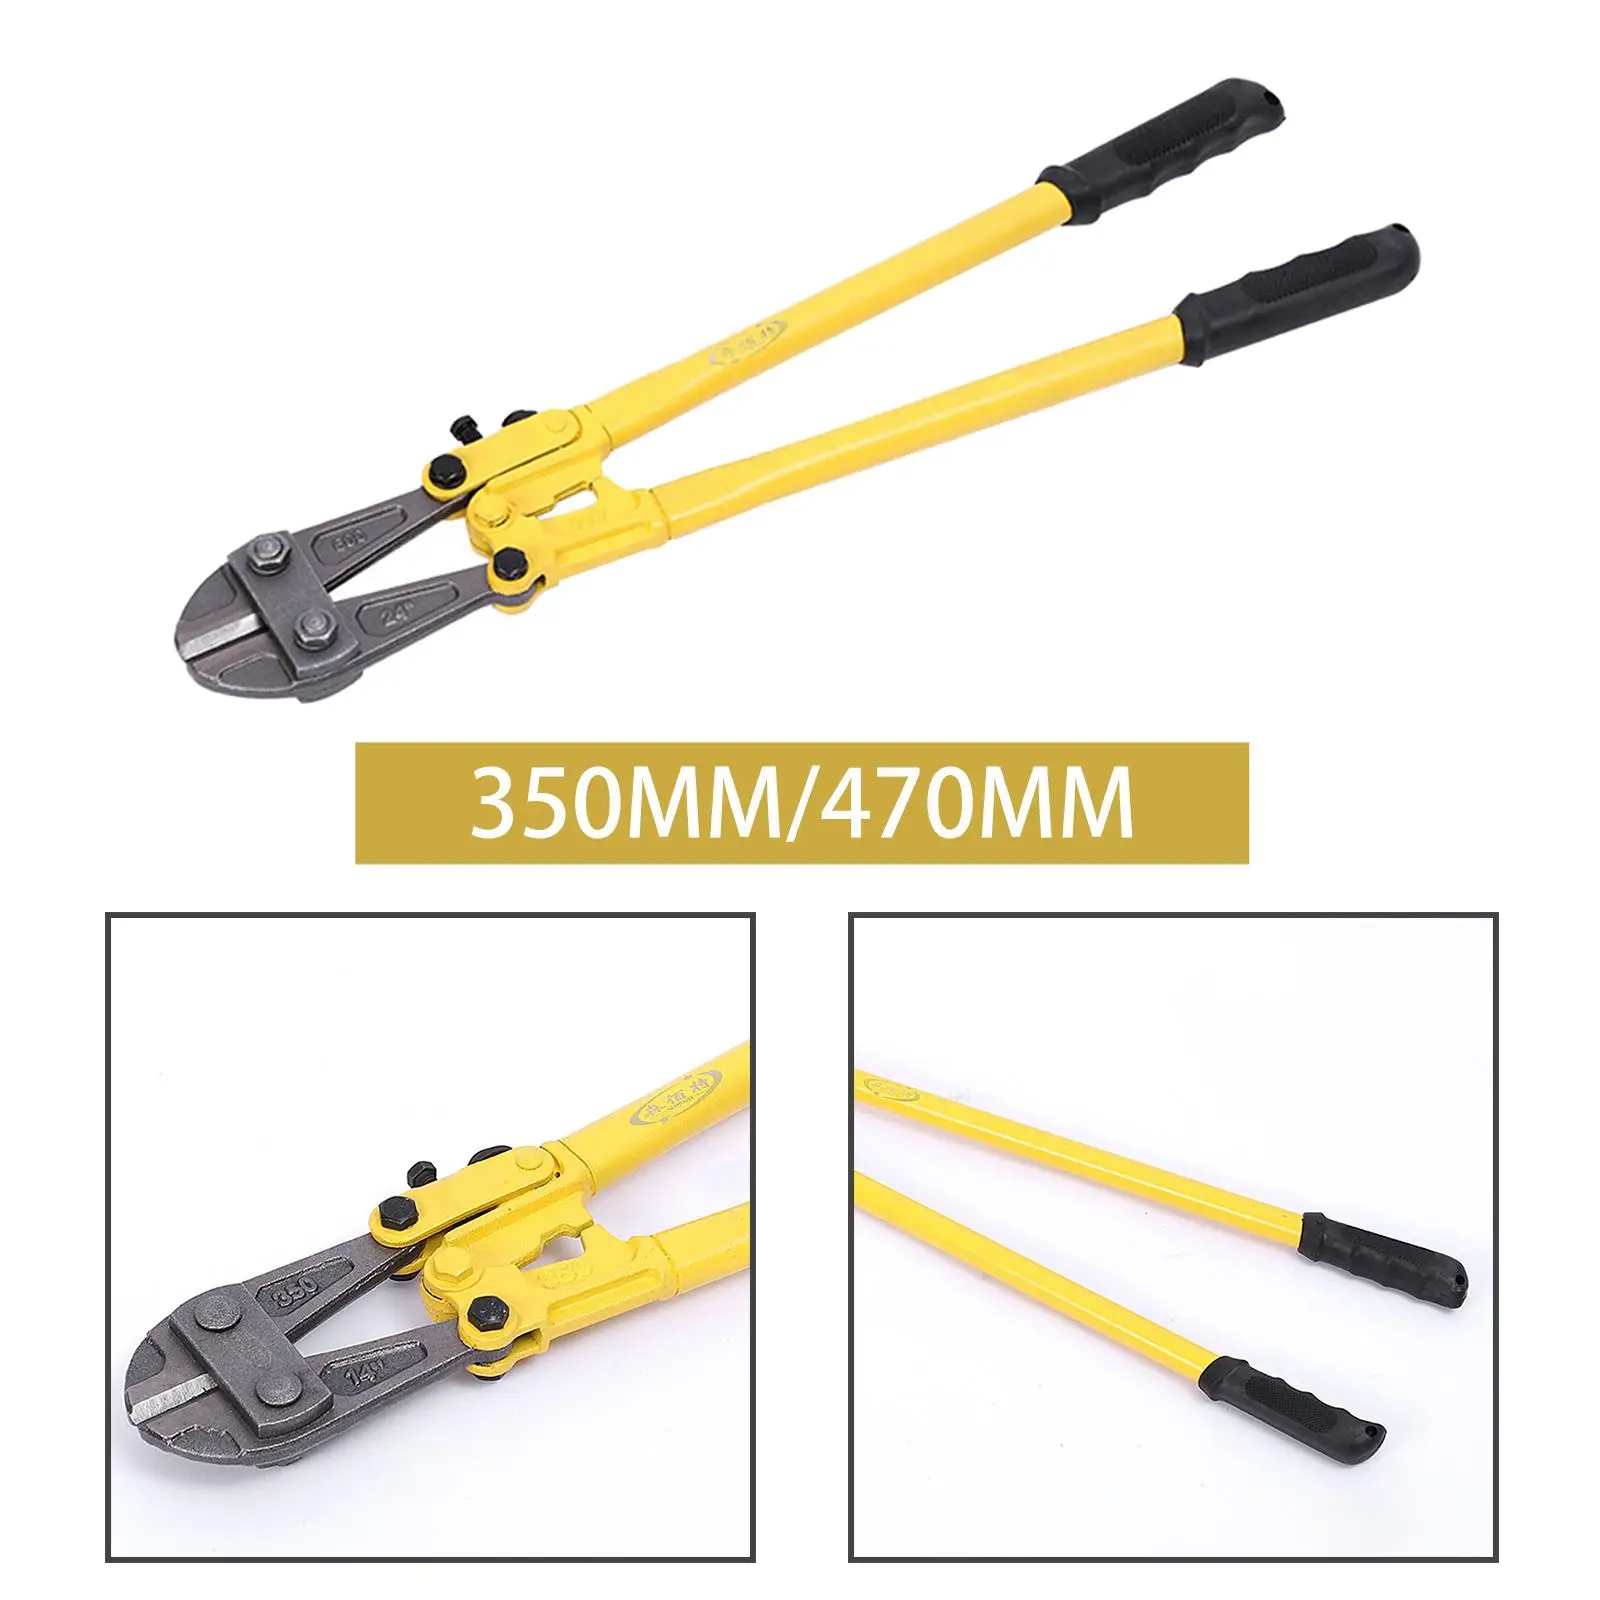 Bolt Cutter with Comfort Grip Forged T8 Steel Blade Heavy Duty Steel Bar Cutter for Locks Rods Screws Wires Chain Link Fence